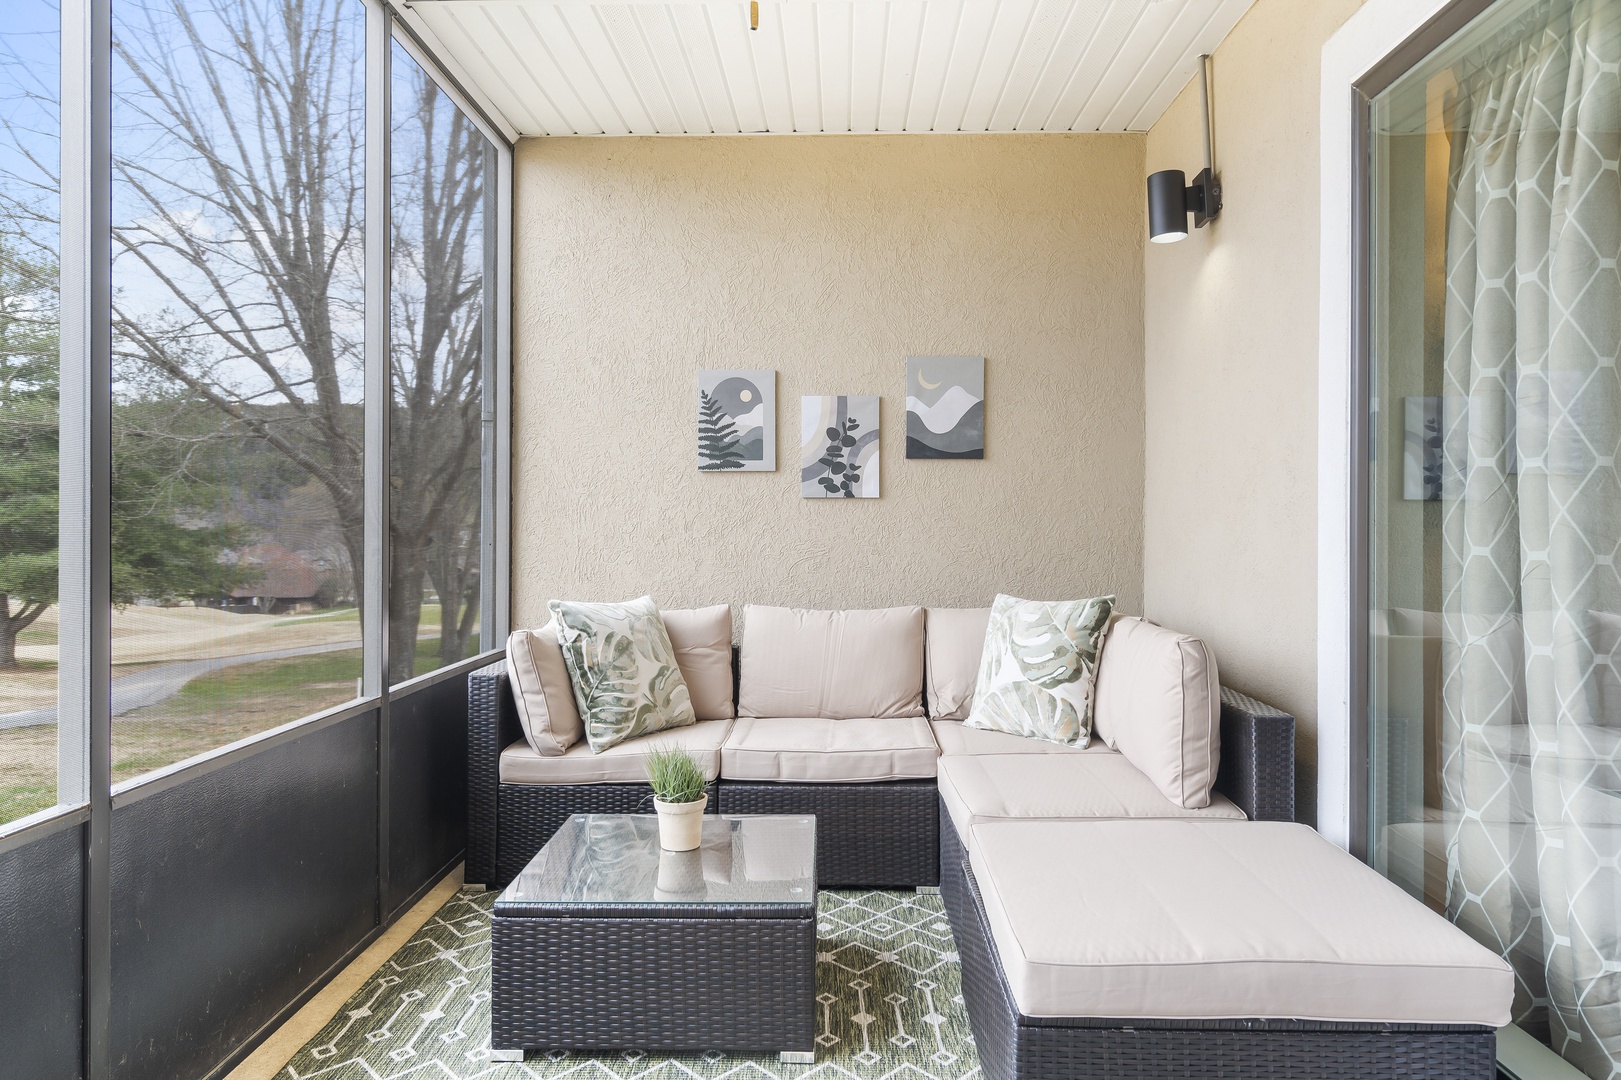 Screened porch with with outdoor seating